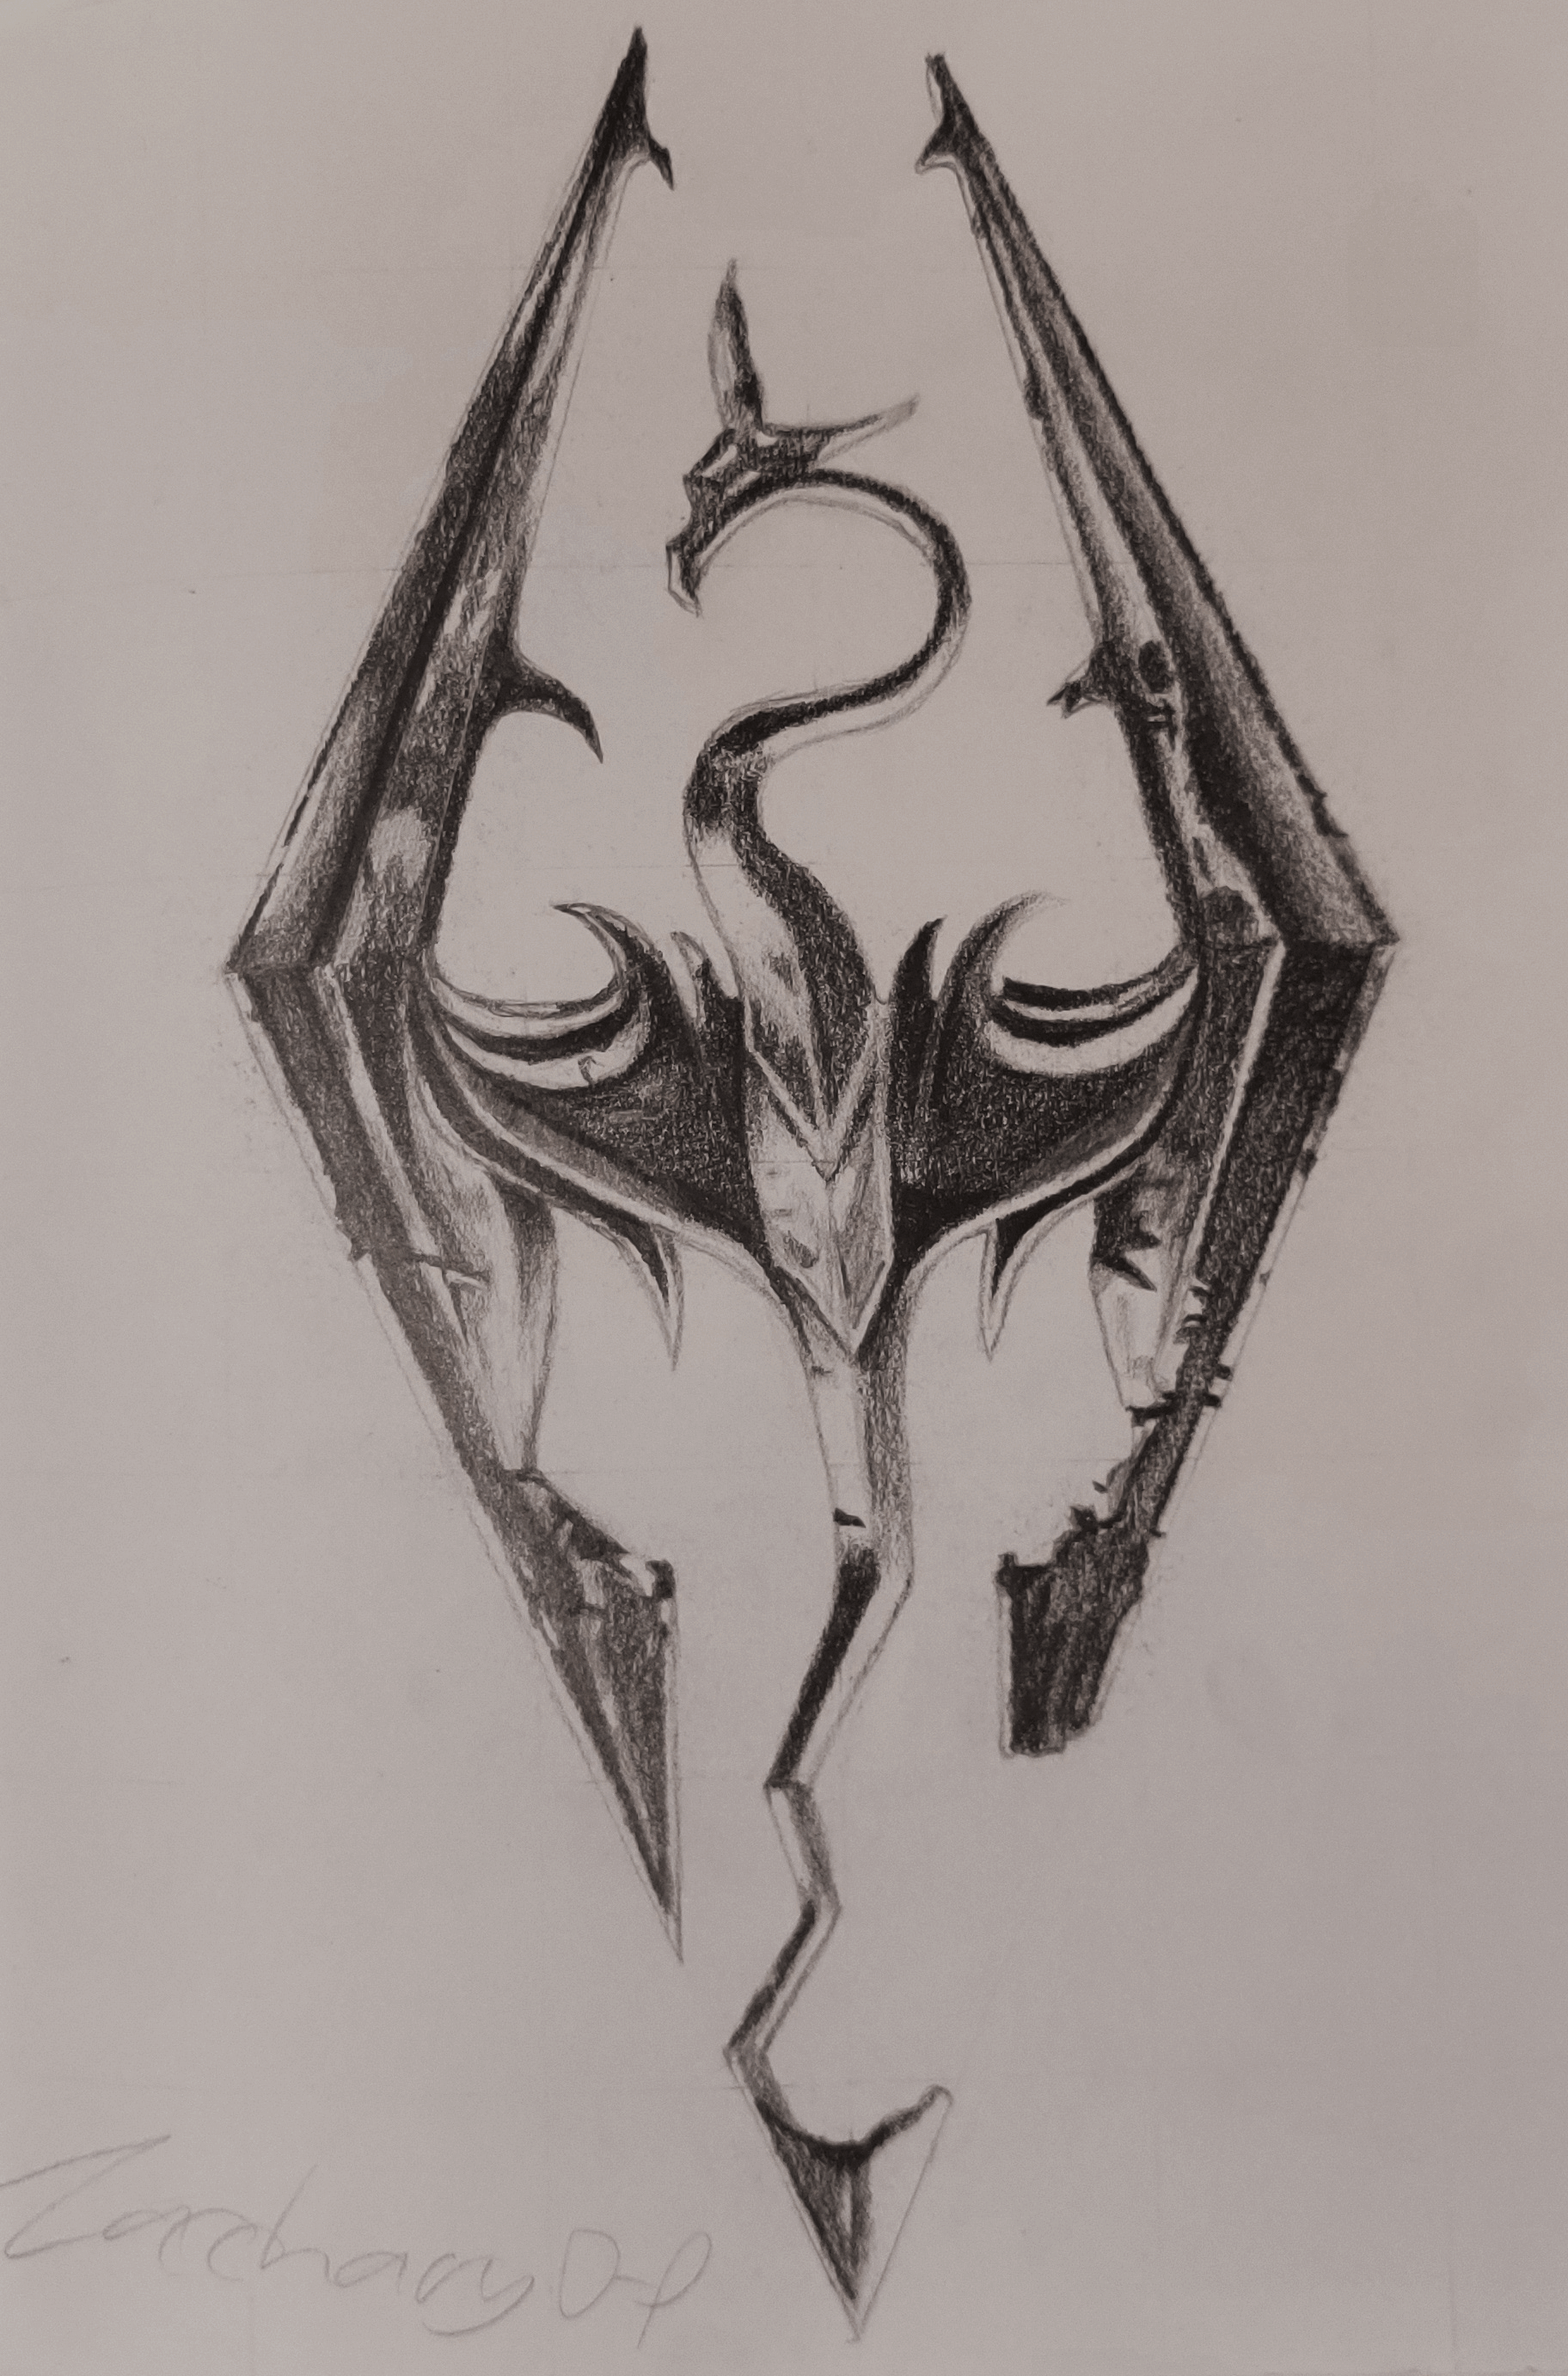 A pencil drawing of the Skyrim logo.